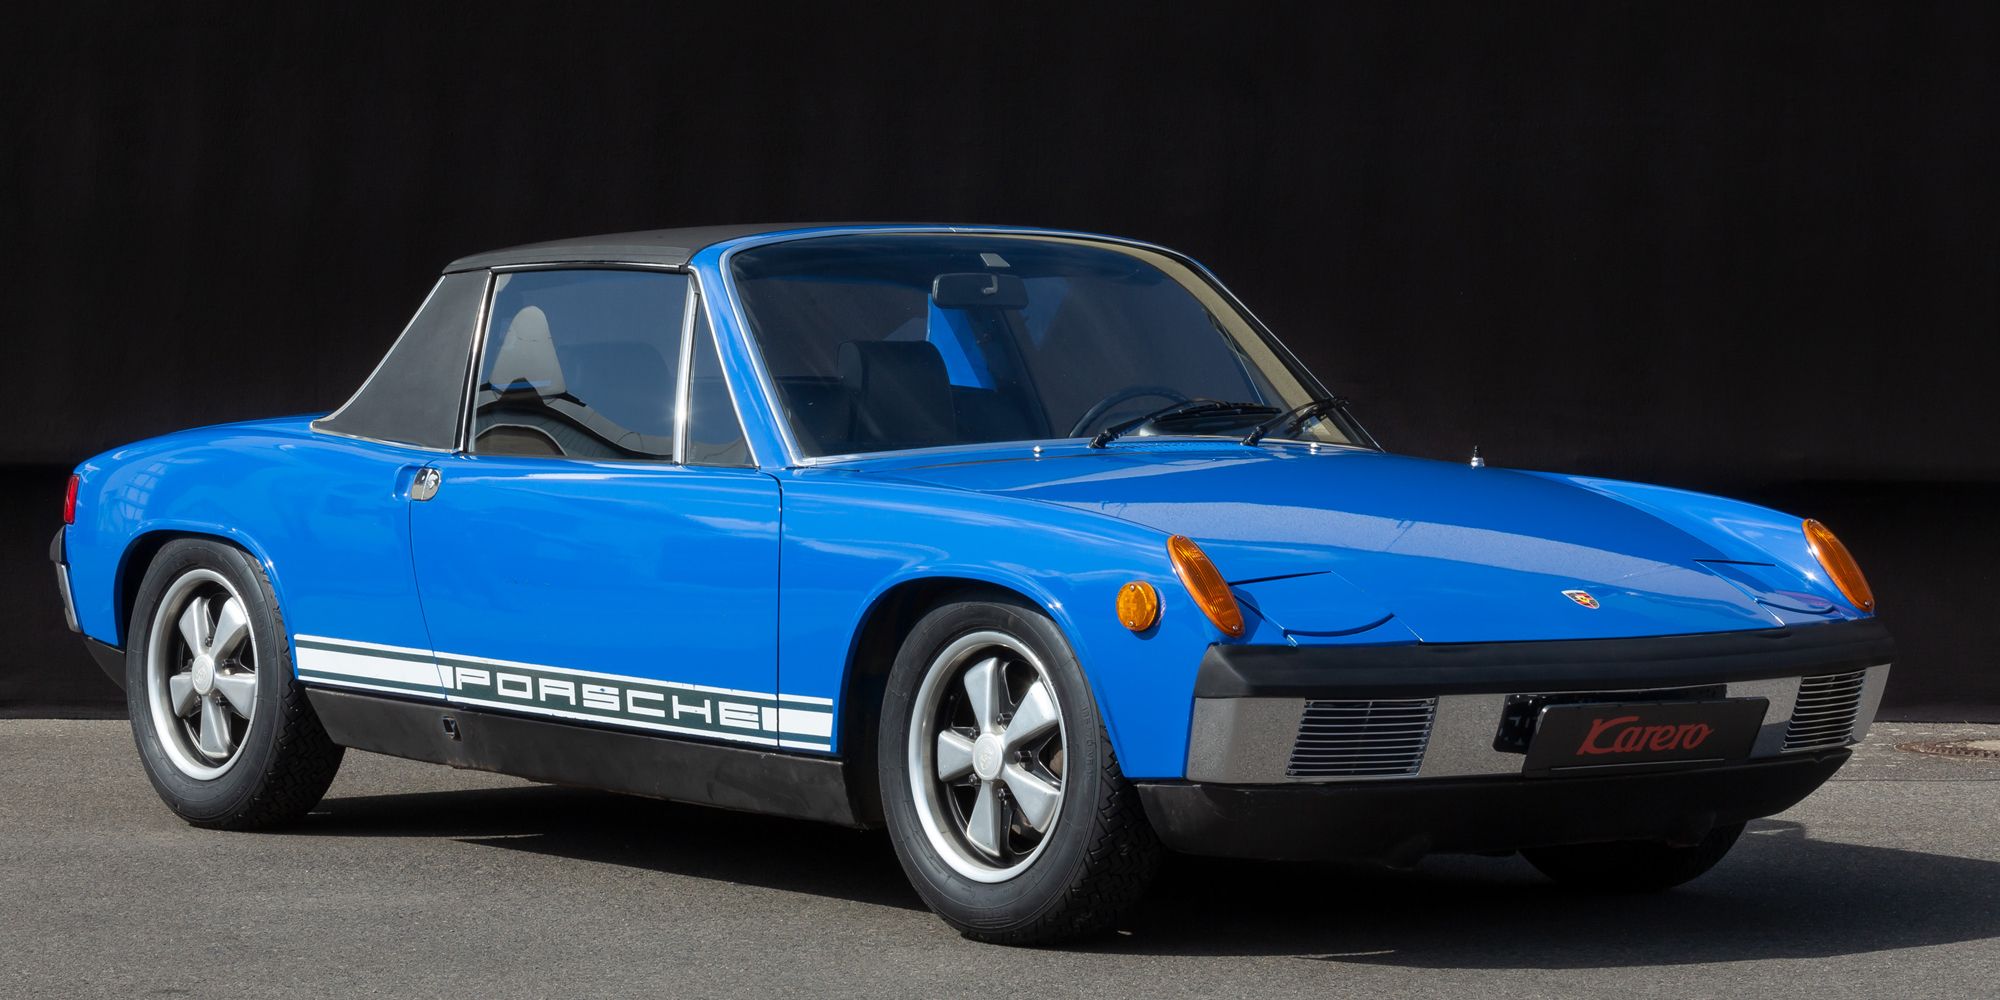 The front of the Porsche 914